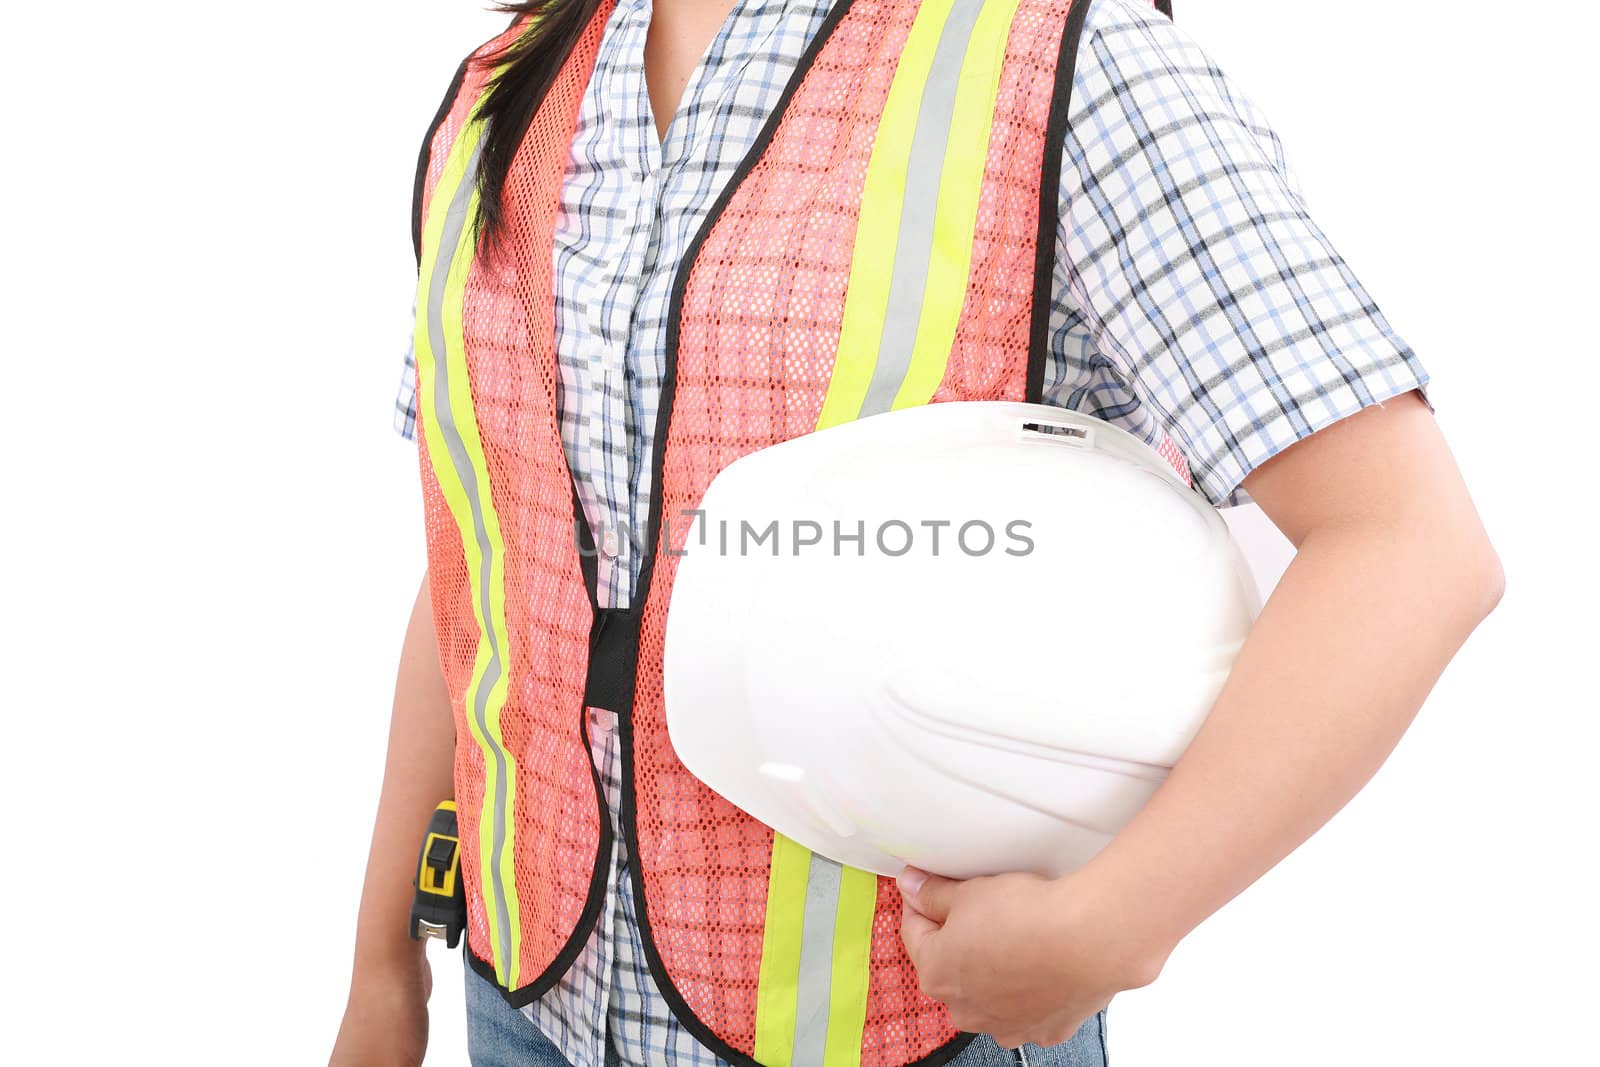 Engineer woman holding an helmet, isolated over white